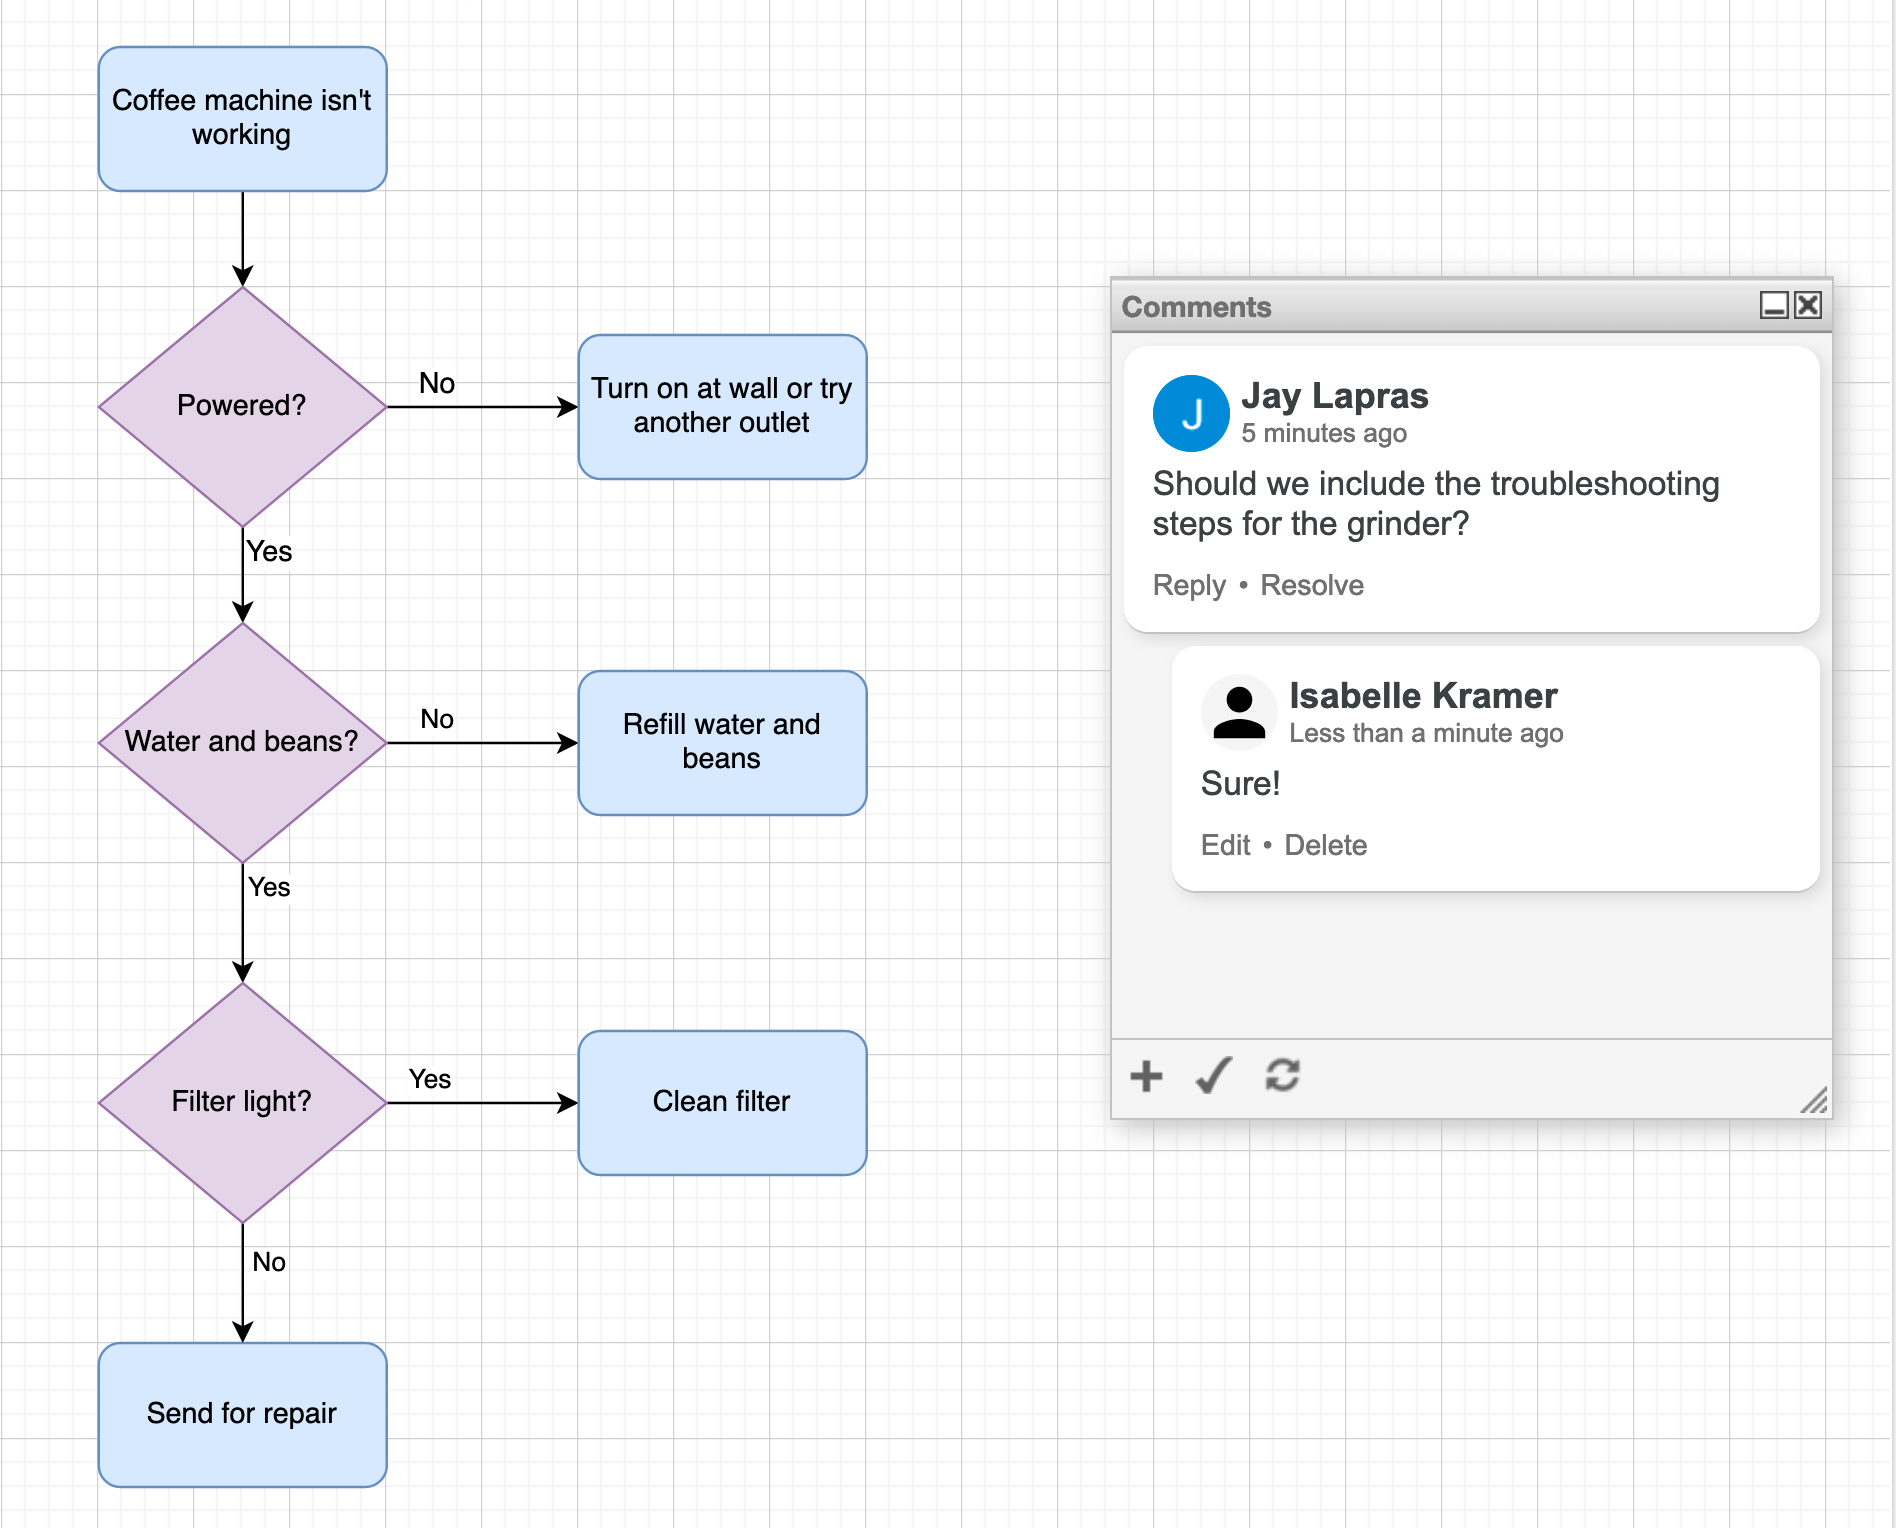 Reply to a comment on a diagram stored in Google Drive via the draw.io editor